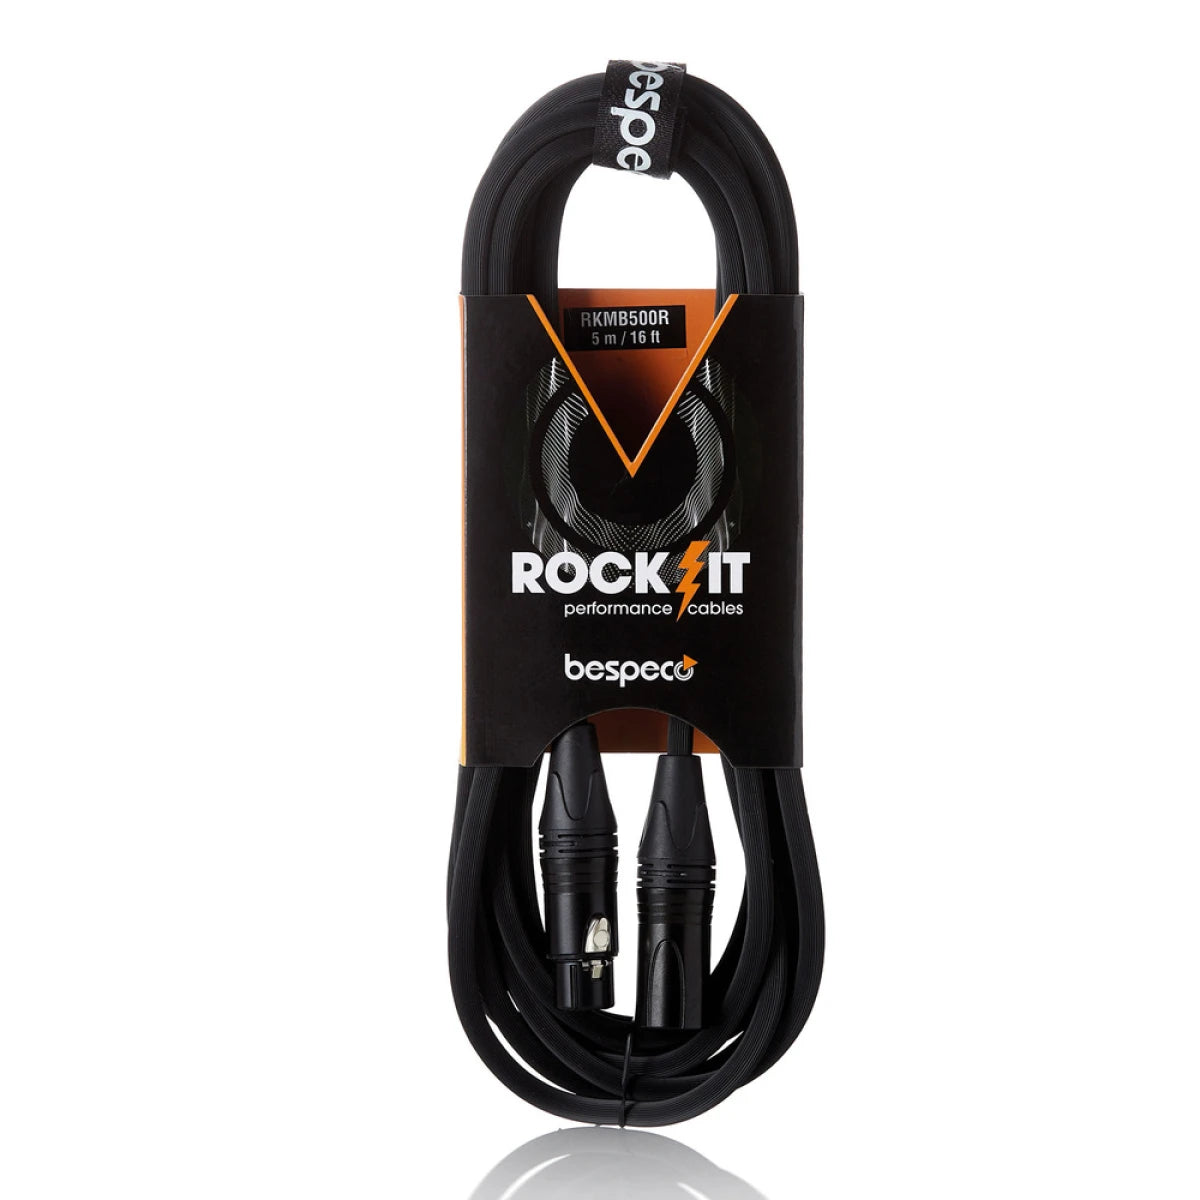 Bespeco Rock IT, Microphone Cable, RKMB500R, 4.5m or 15ft